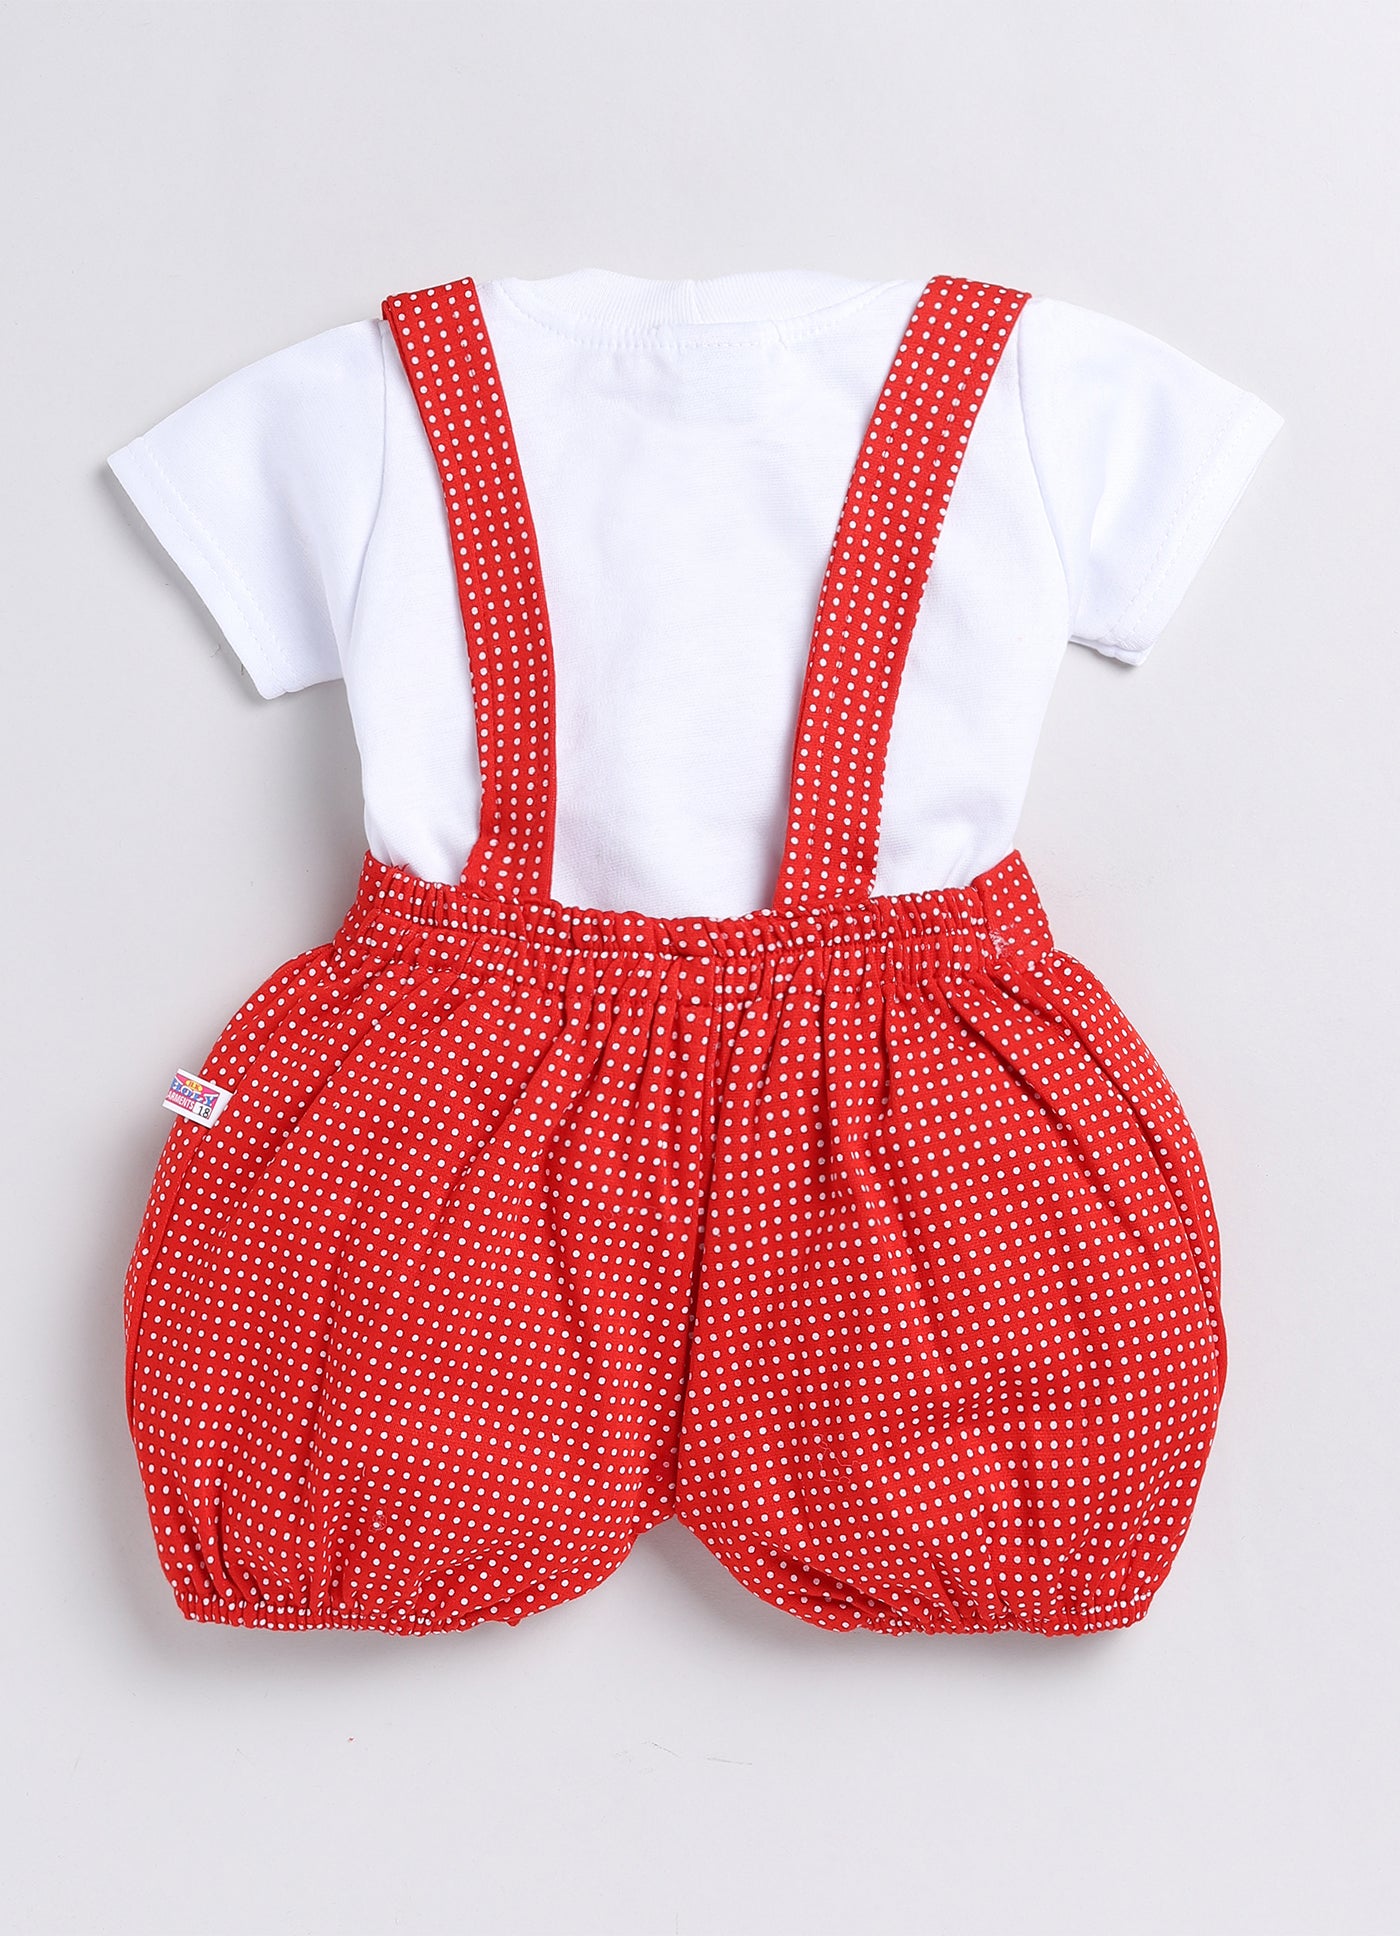 "Mommy Club Polka-Dotted Bear-Themed Infant Overalls Set, Size 0-18 Months"